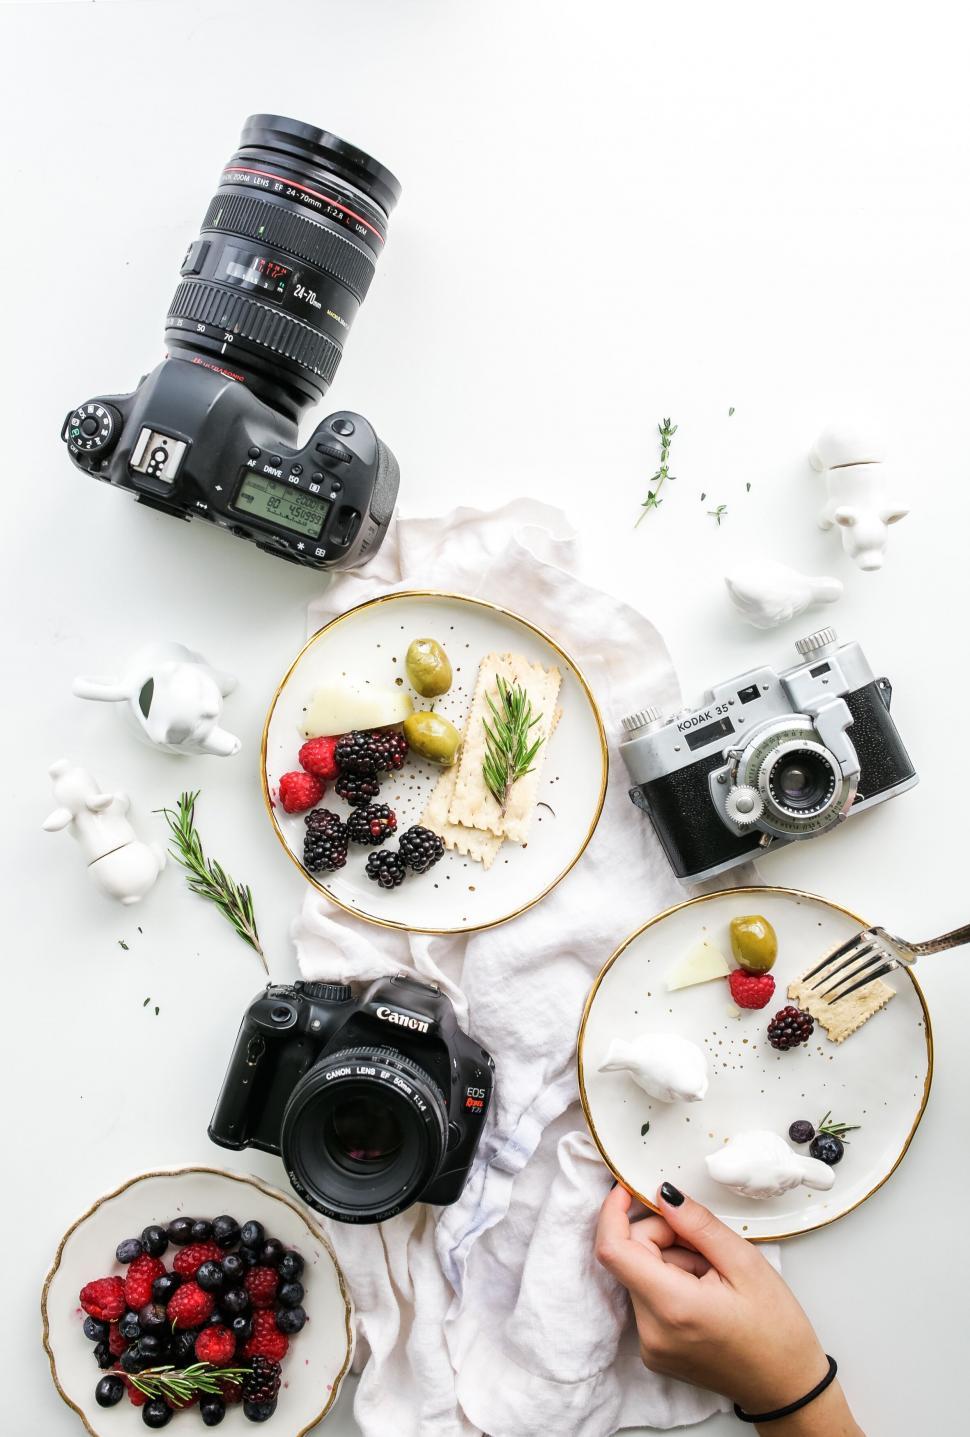 Free Image of Top view of food photography setup with cameras 